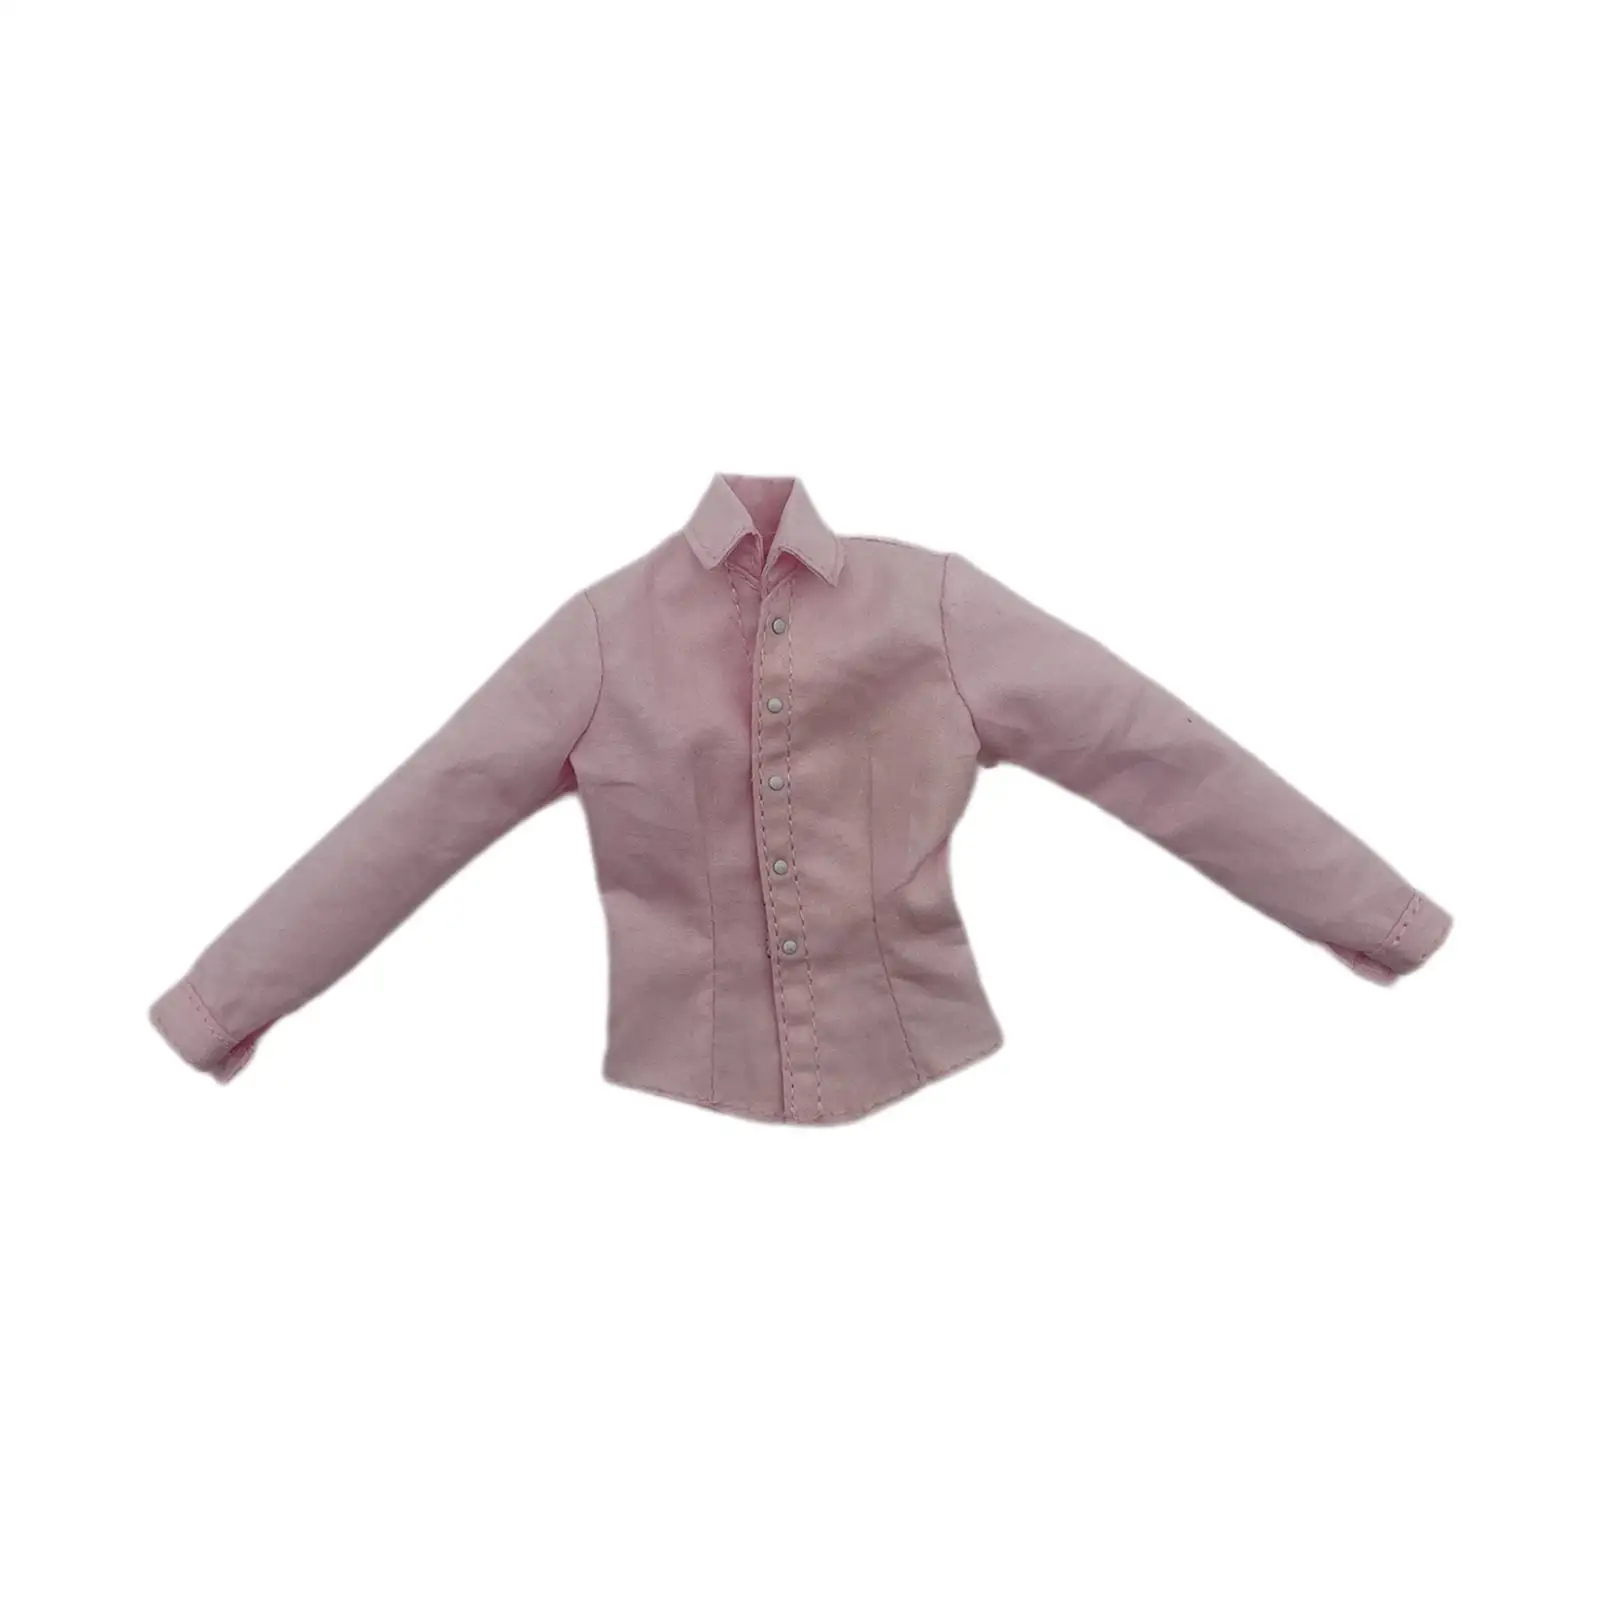 1/6 Girl Pink Long Sleeve Shirts for 12inch Action Figure Accessory Dress up